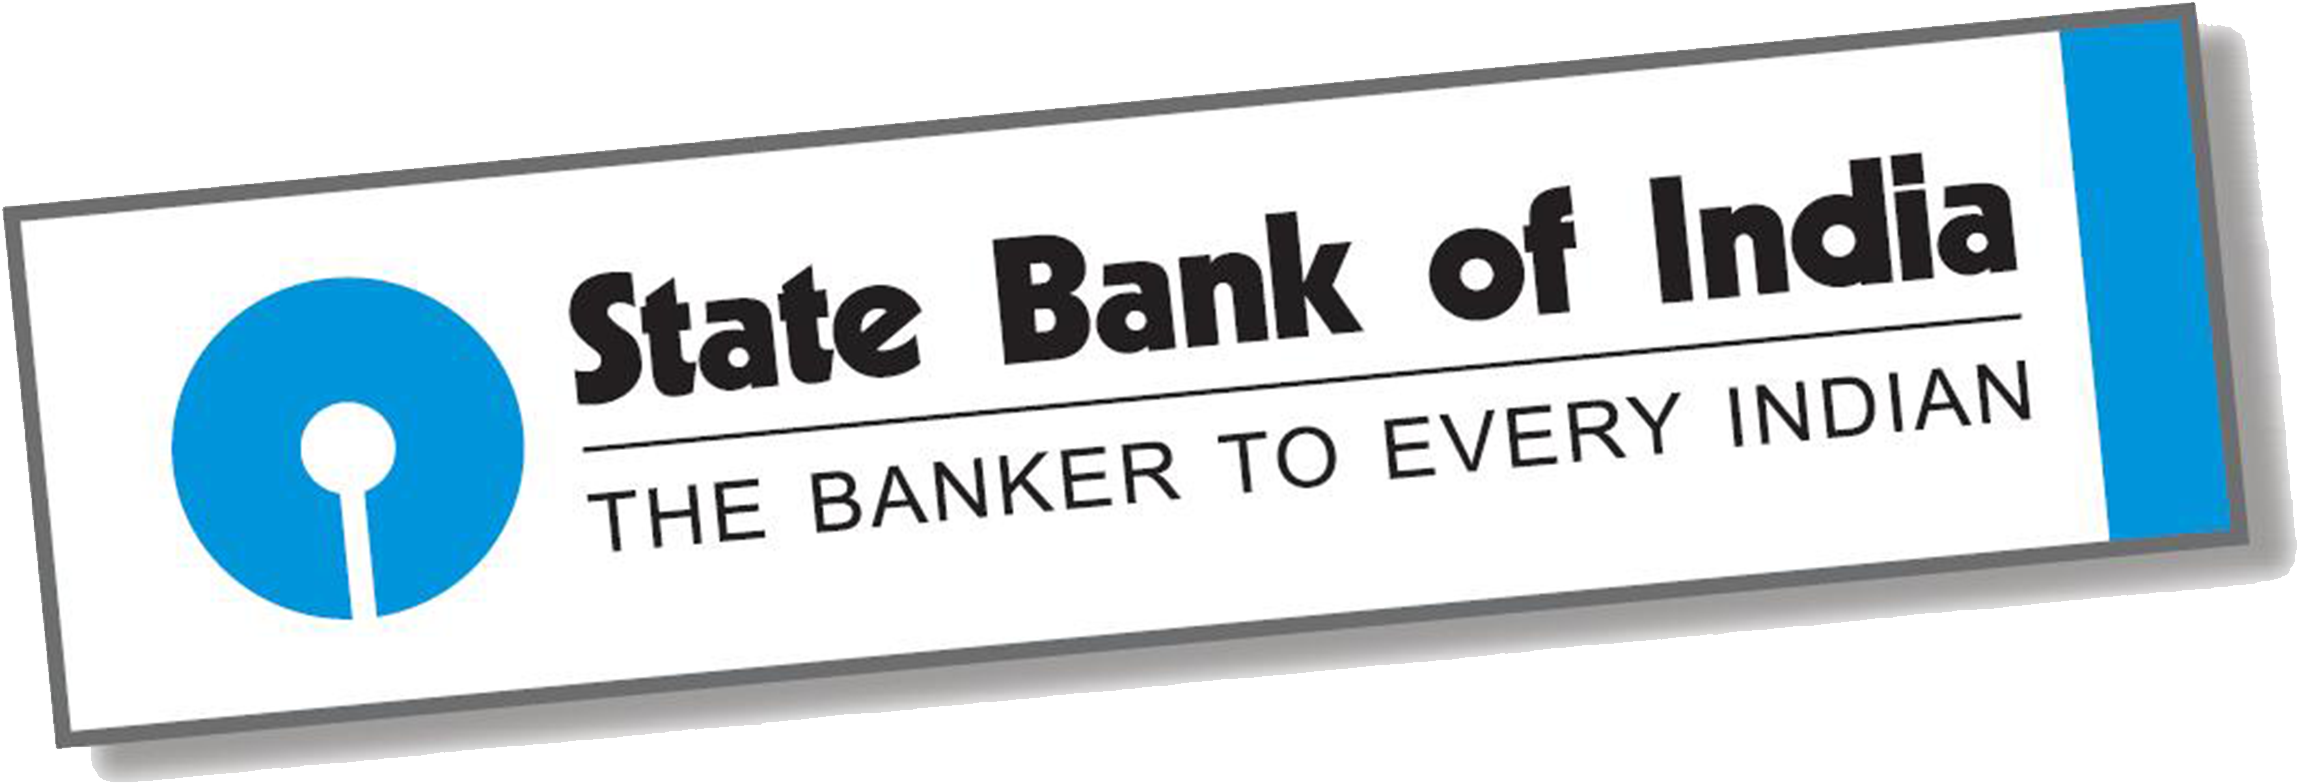 Download Image State Bank Of India Png Image With No Background 3828